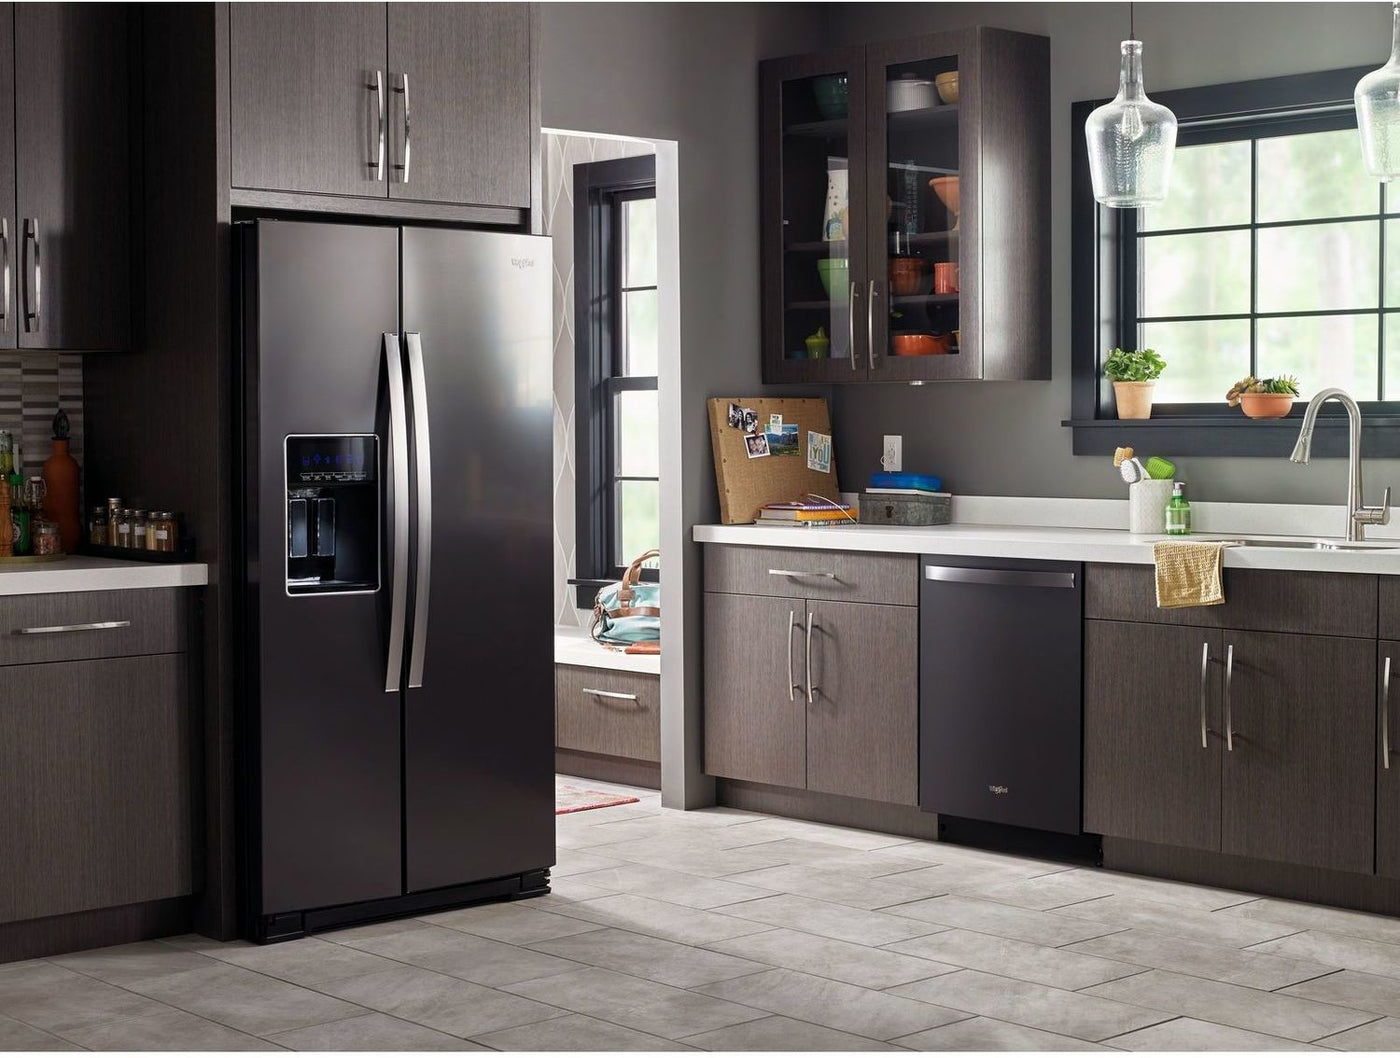 Whirlpool Black Stainless Steel Counter-Depth Side-by-Side Refrigerator (21 Cu. Ft.) - WRS571CIHV